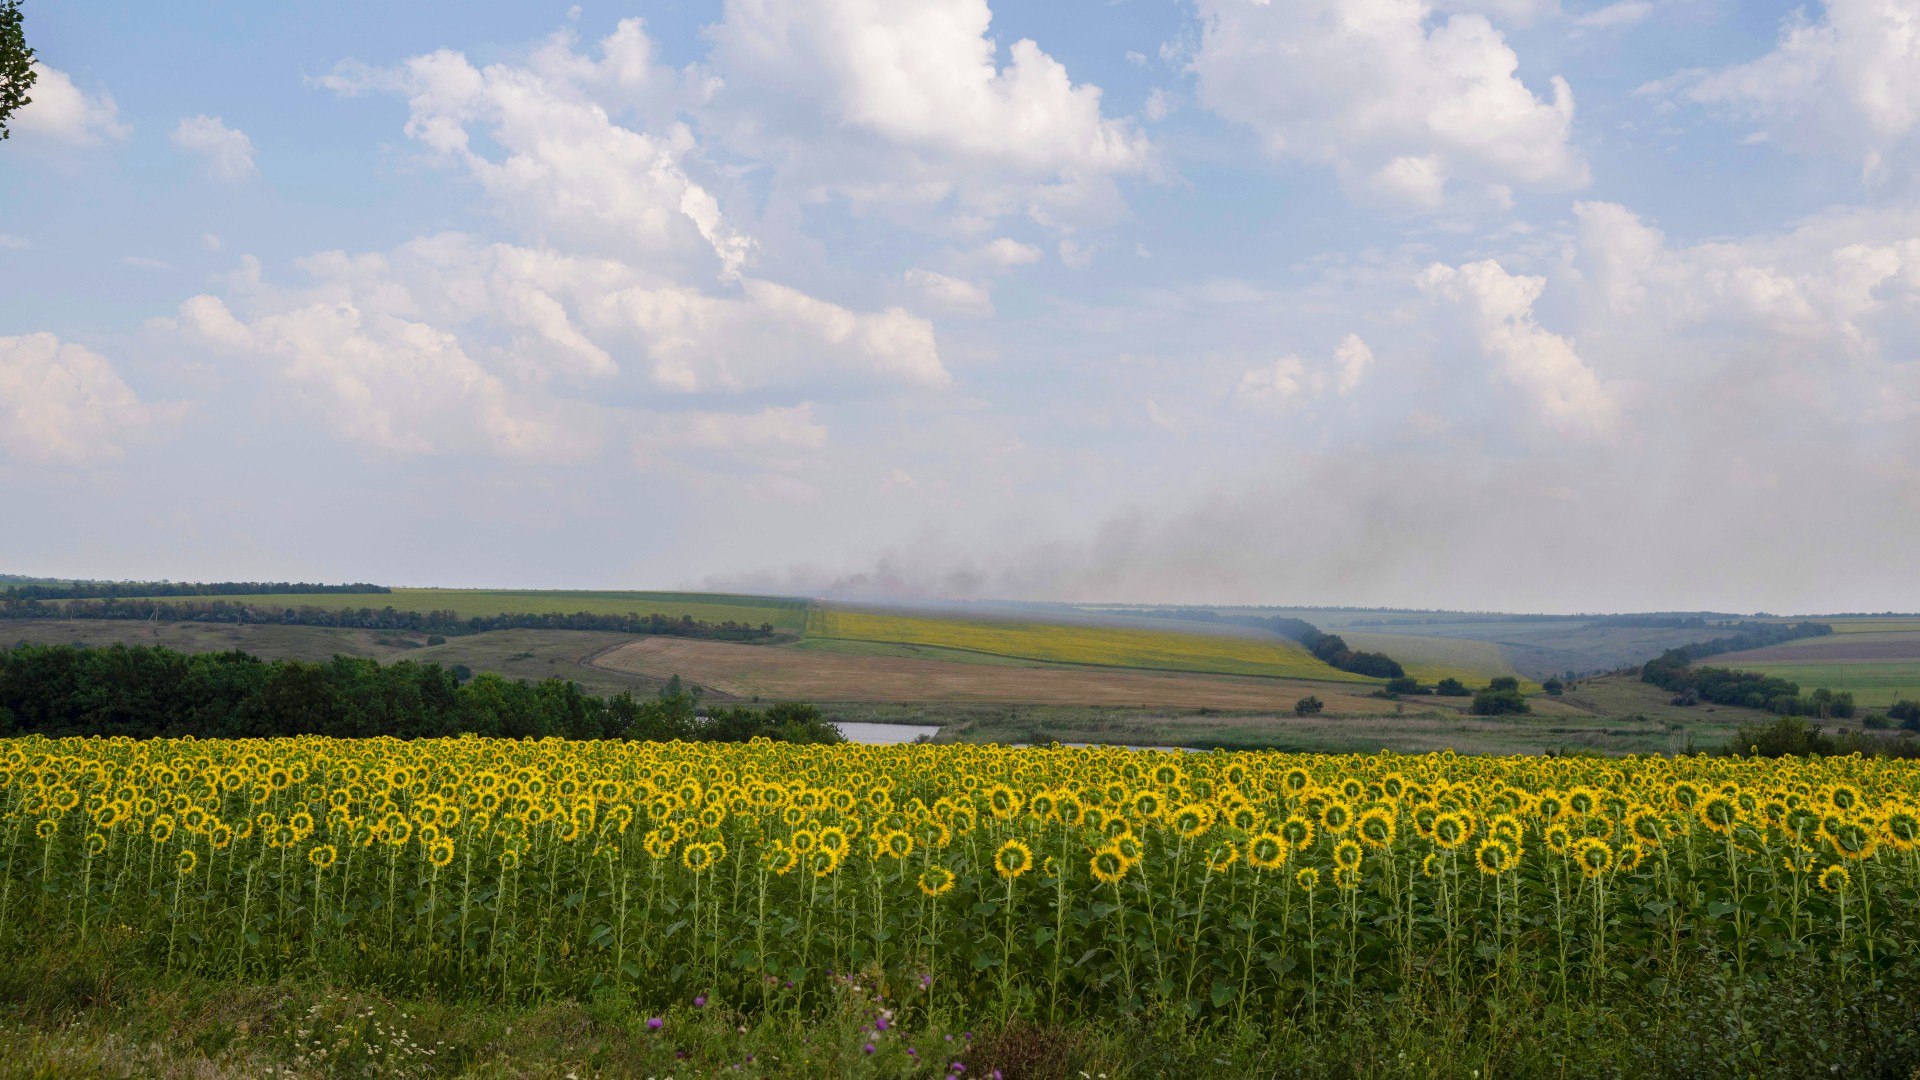 sunflowers with a smoke plume far on the horizon, in behind